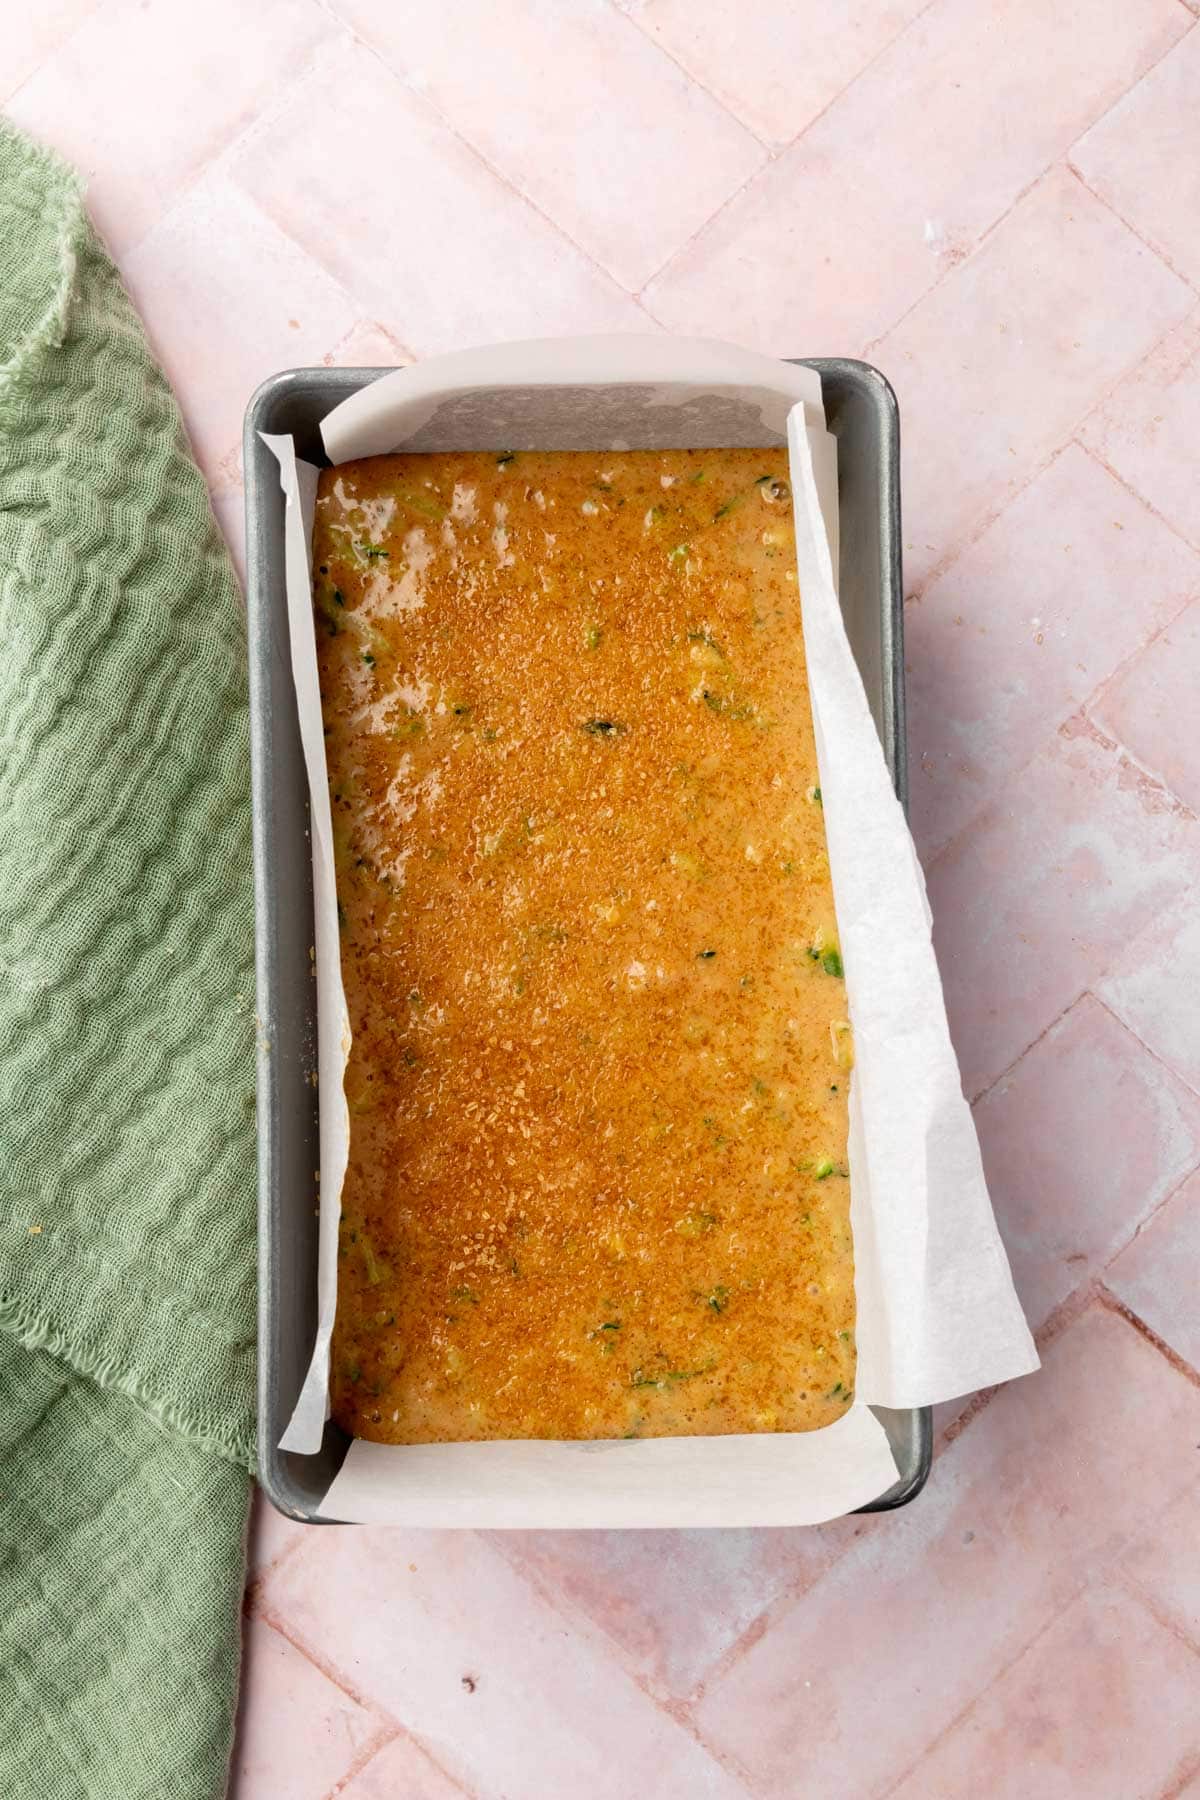 Gluten-free zucchini bread batter in a lined loaf pan before baking.